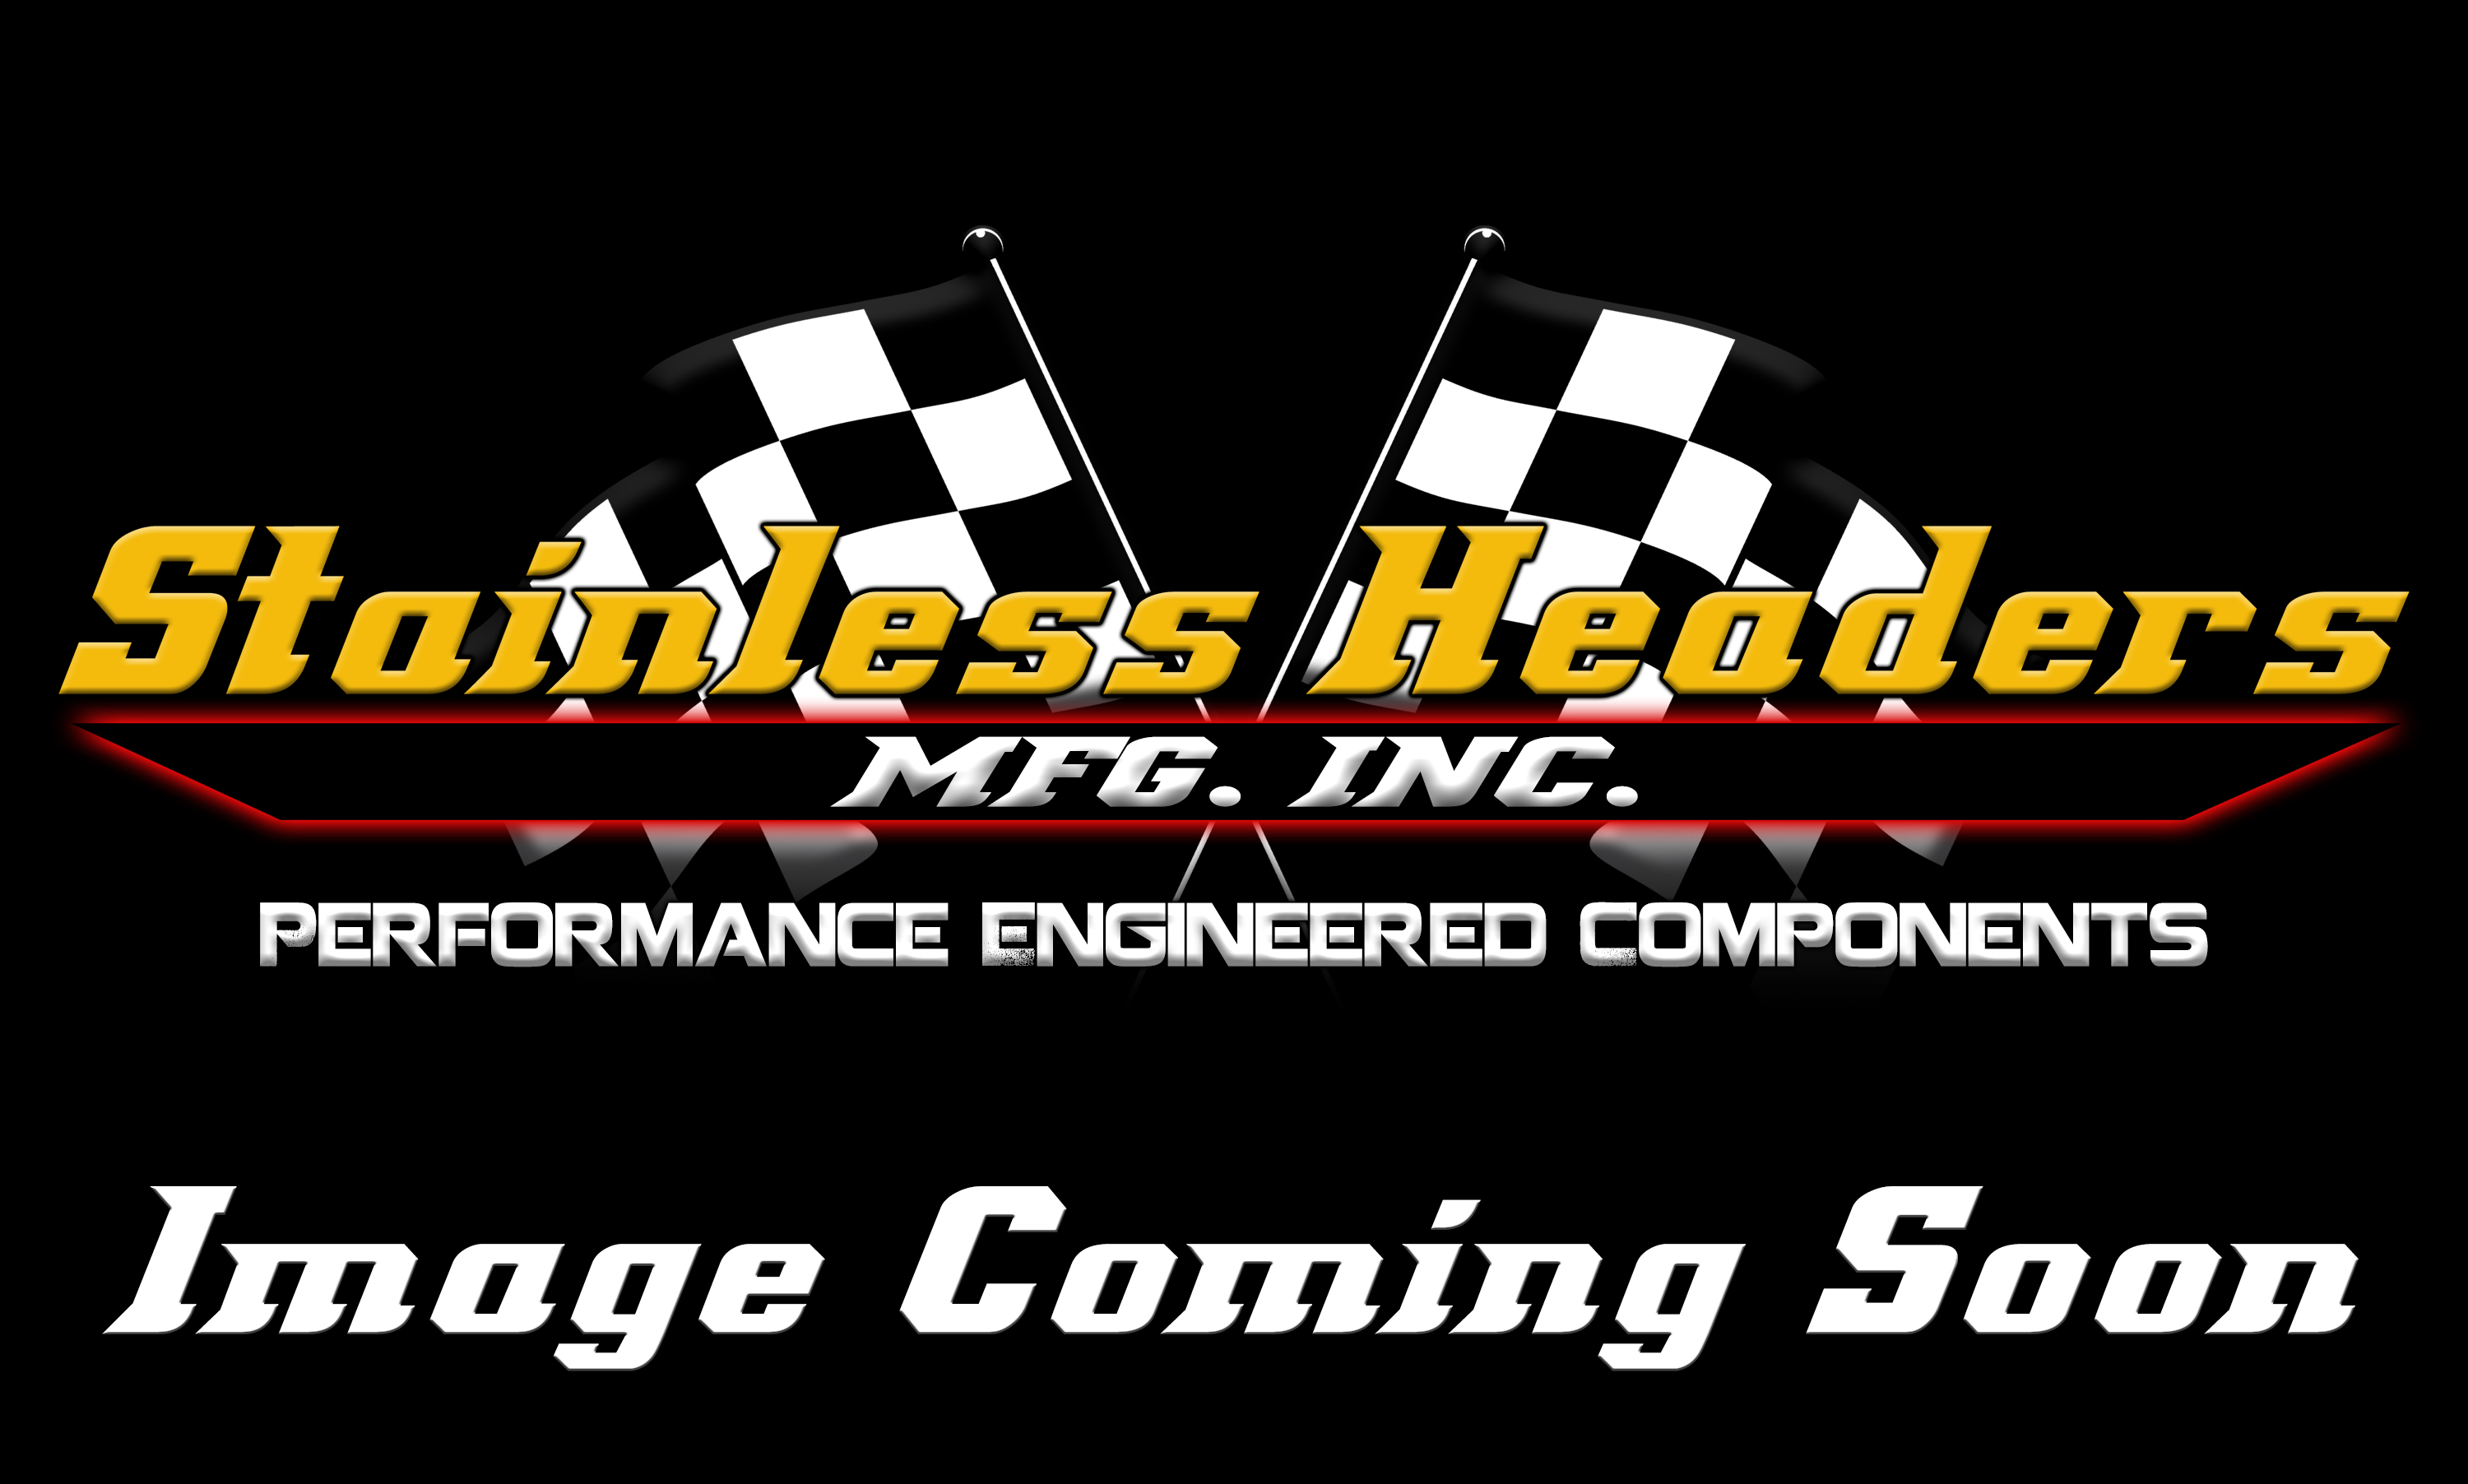 CompTurbo Technology Turbochargers - Comp Turbo Journal Bearing Turbochargers - CompTurbo Technologies - CTR4208H-7280 Reverse Rotation 360 Journal Bearing Turbocharger (1300 HP)